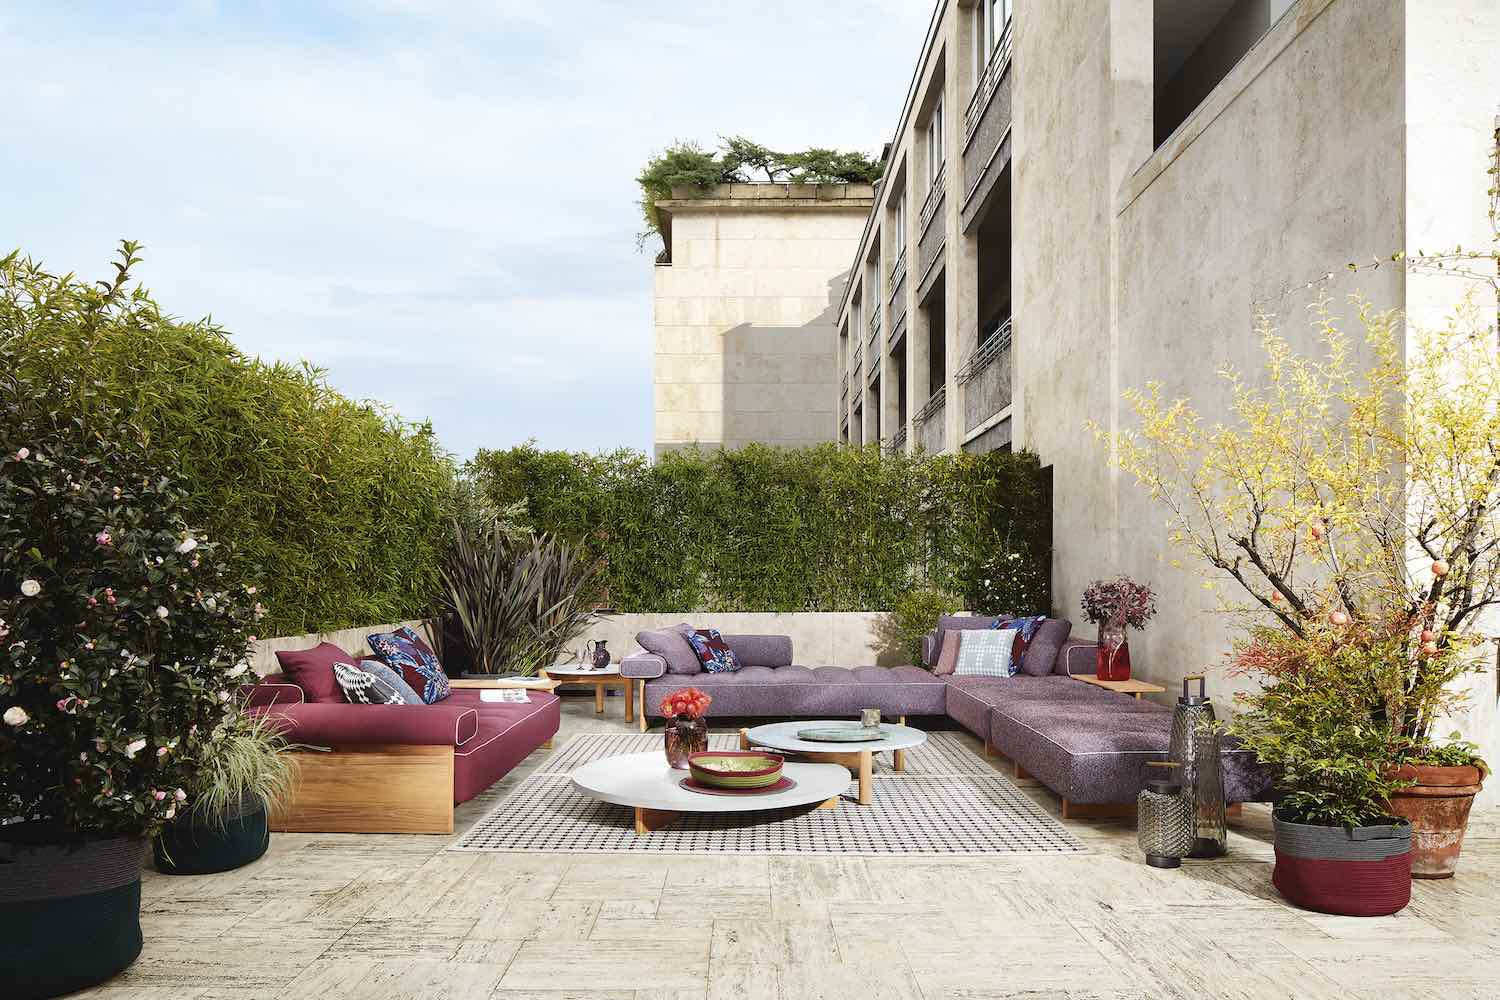 'The Cassina Perspective Goes Outdoor' collection - SAIL OUT by Rodolfo Dordoni - Photo by De Pasquale+Maffini.